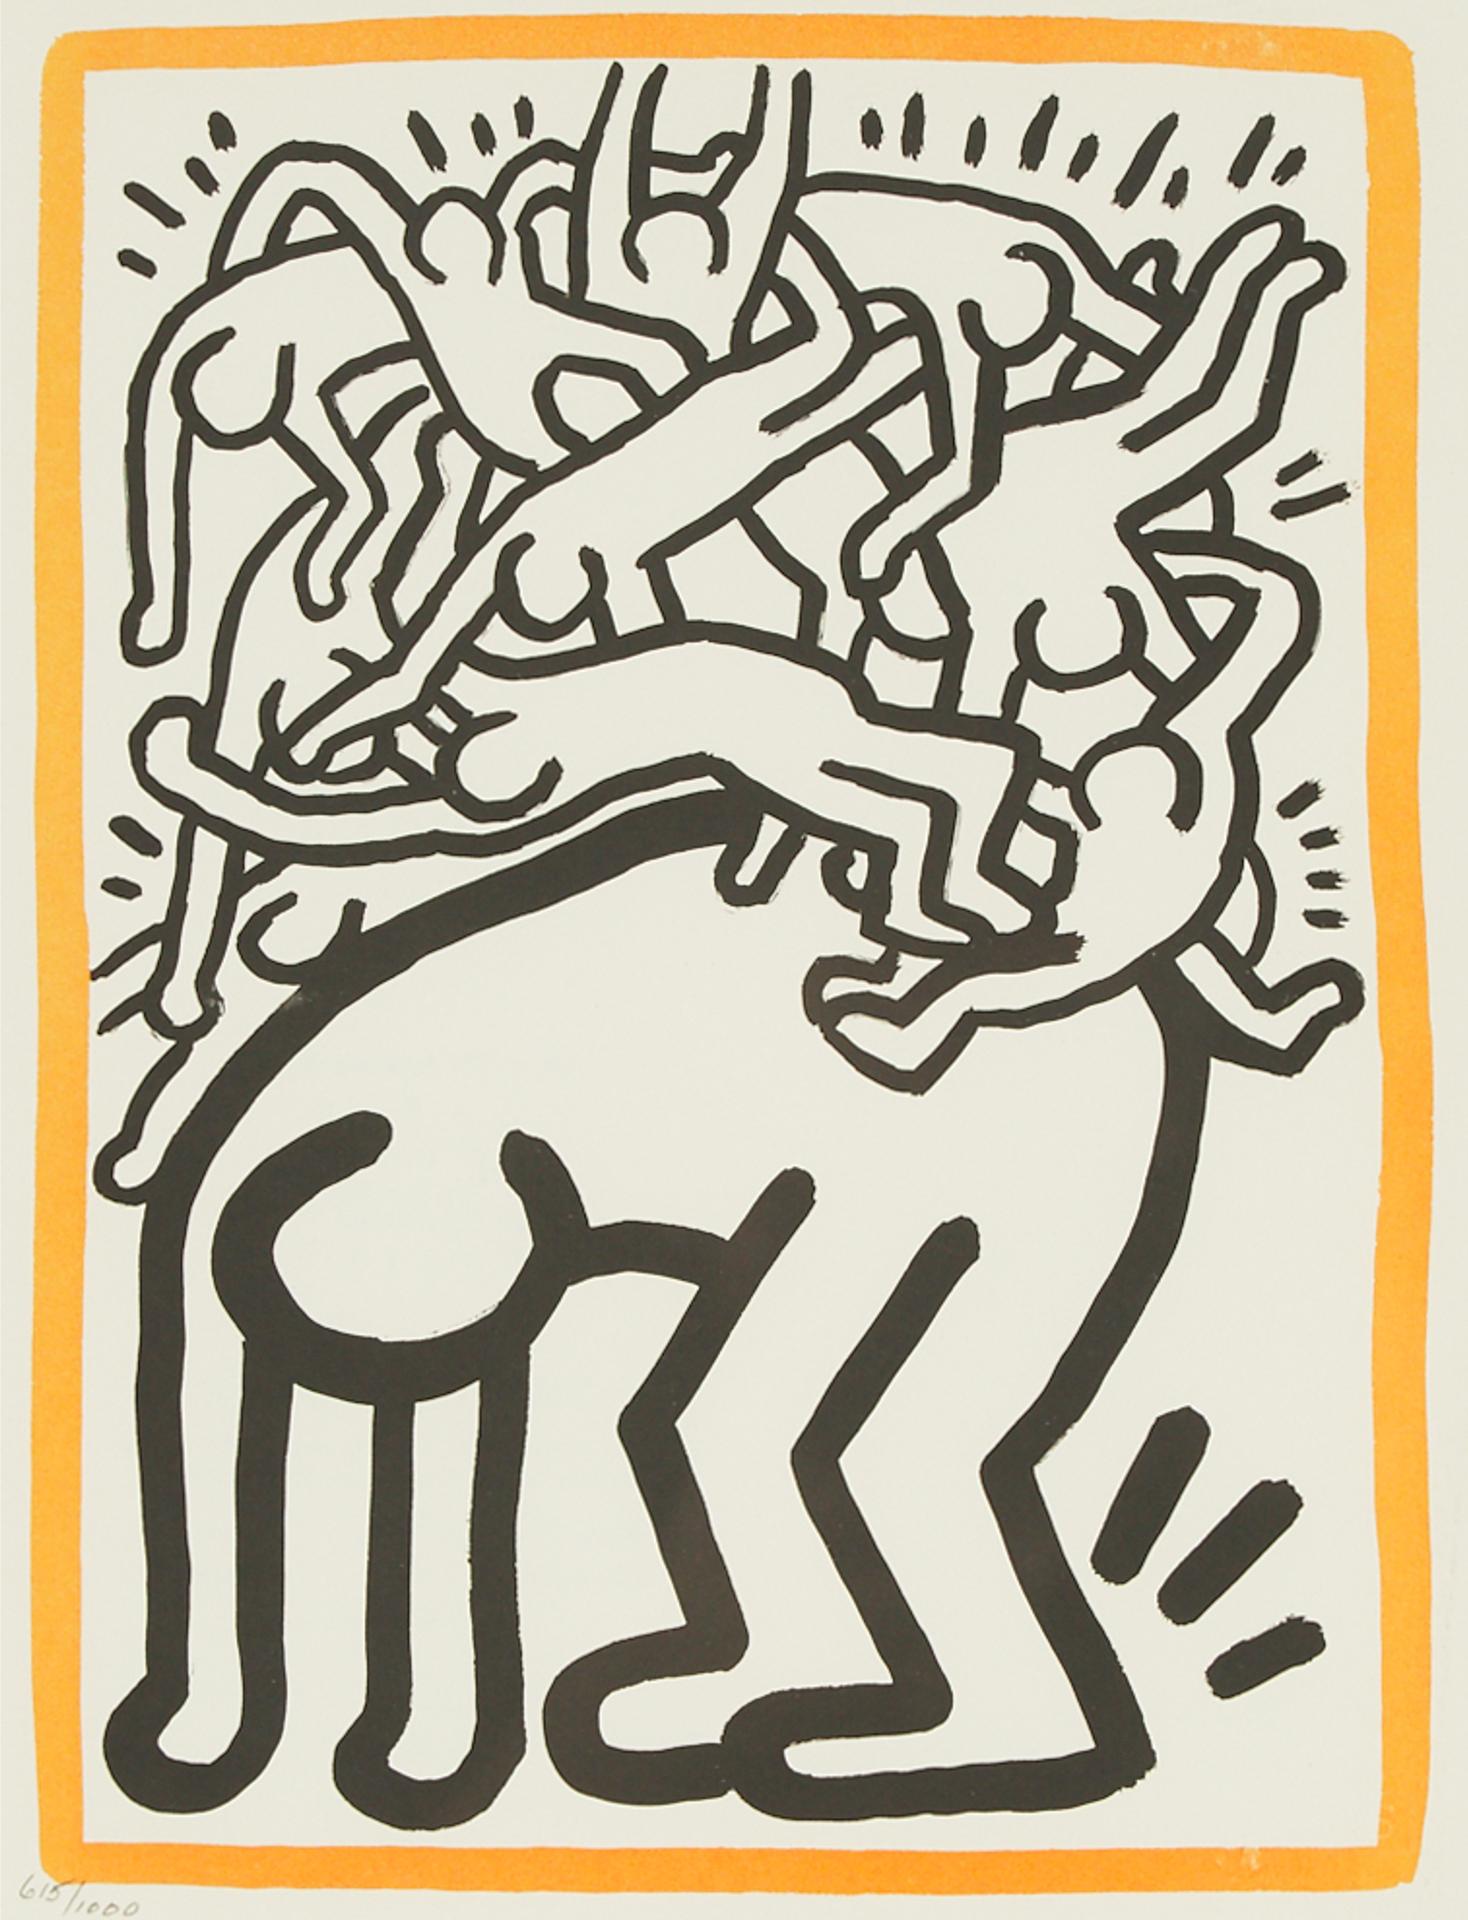 Keith Haring (1958-1990) - Fight Aids Worldwide, 1990